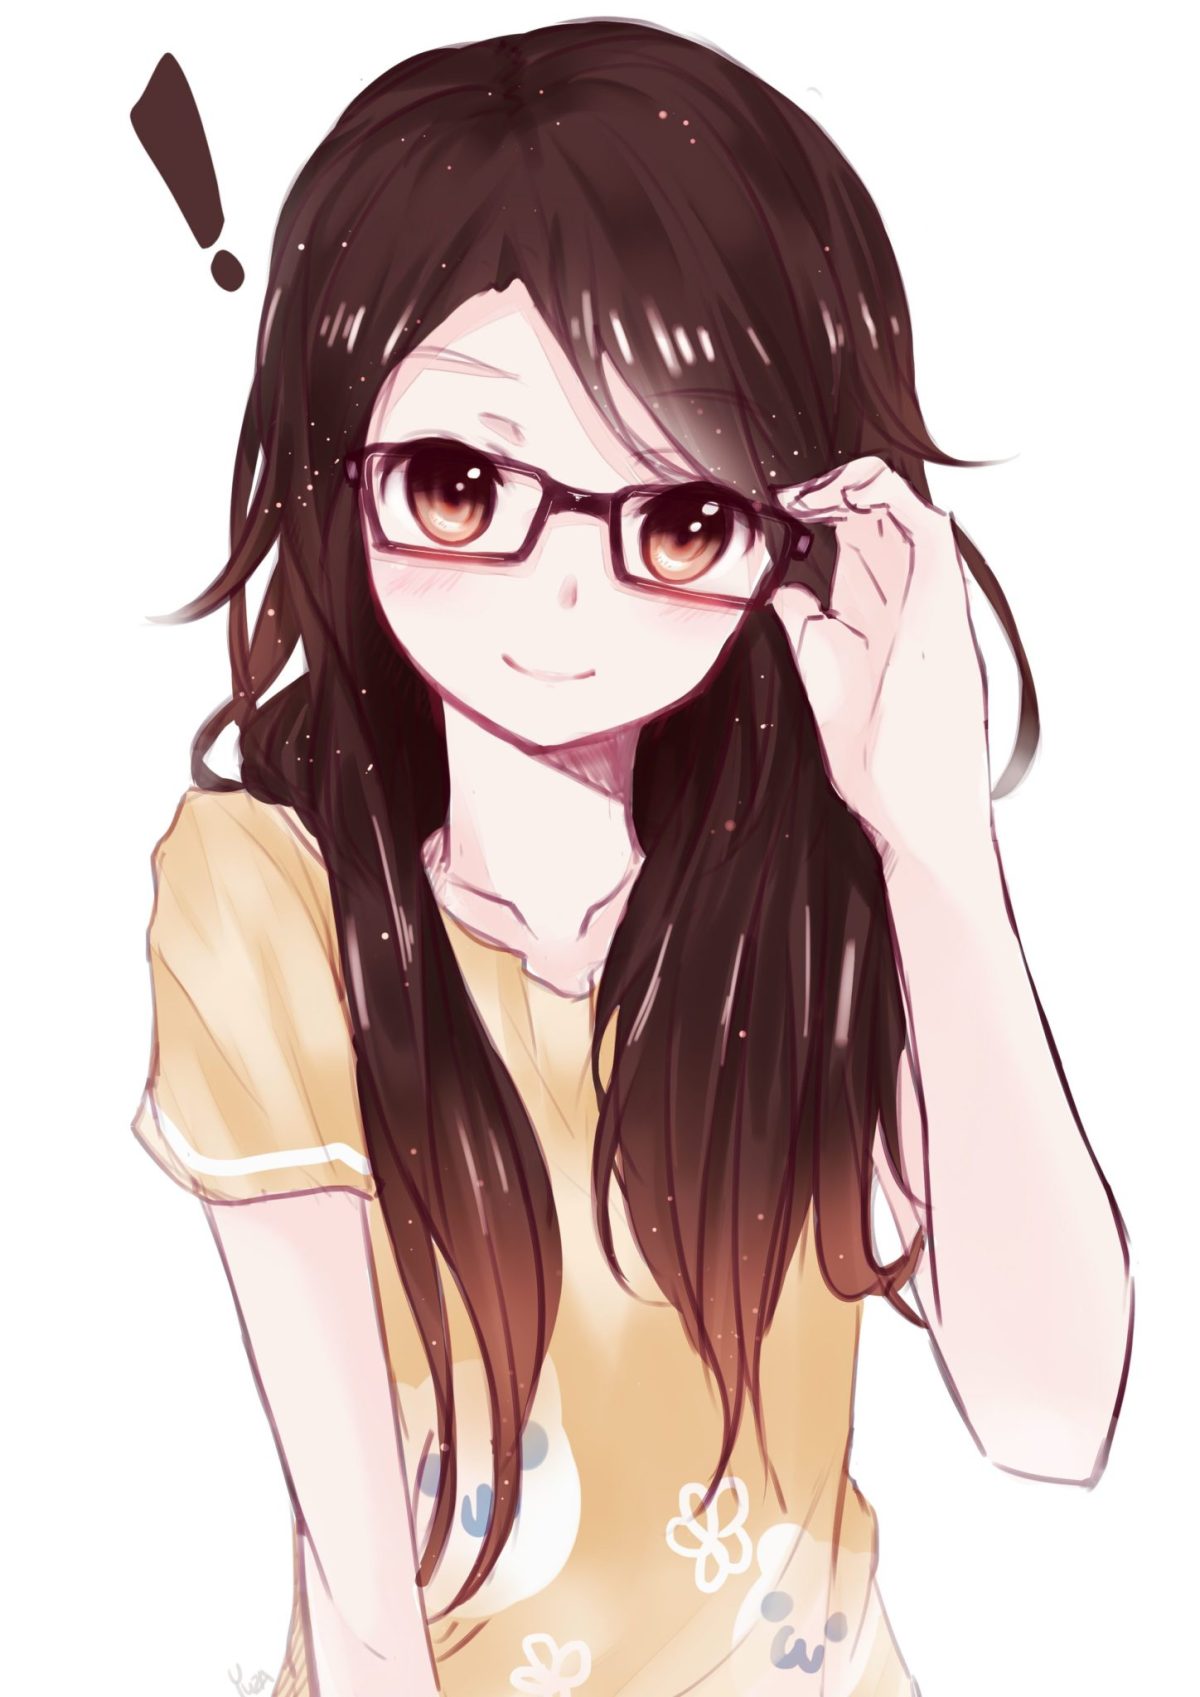 Cute Anime Girl - Cute Anime Girl updated her profile picture.